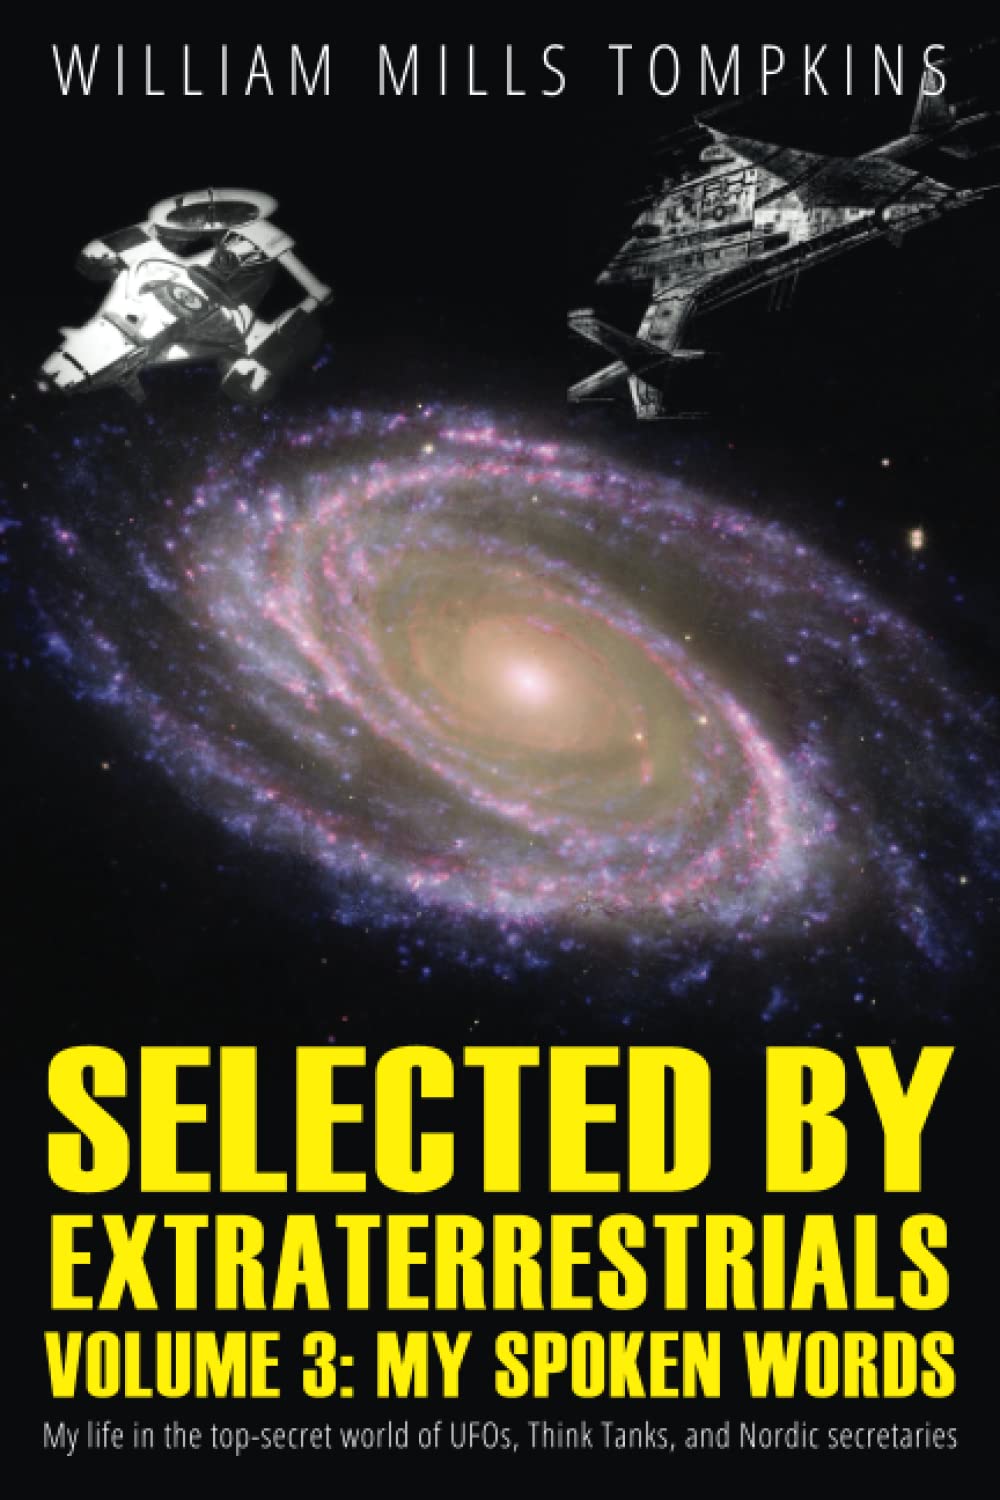 Selected by Extraterrestrials Volume 3, My Spoken Words: My life in the top secret world of UFOs, Think Tanks and Nordic secretaries